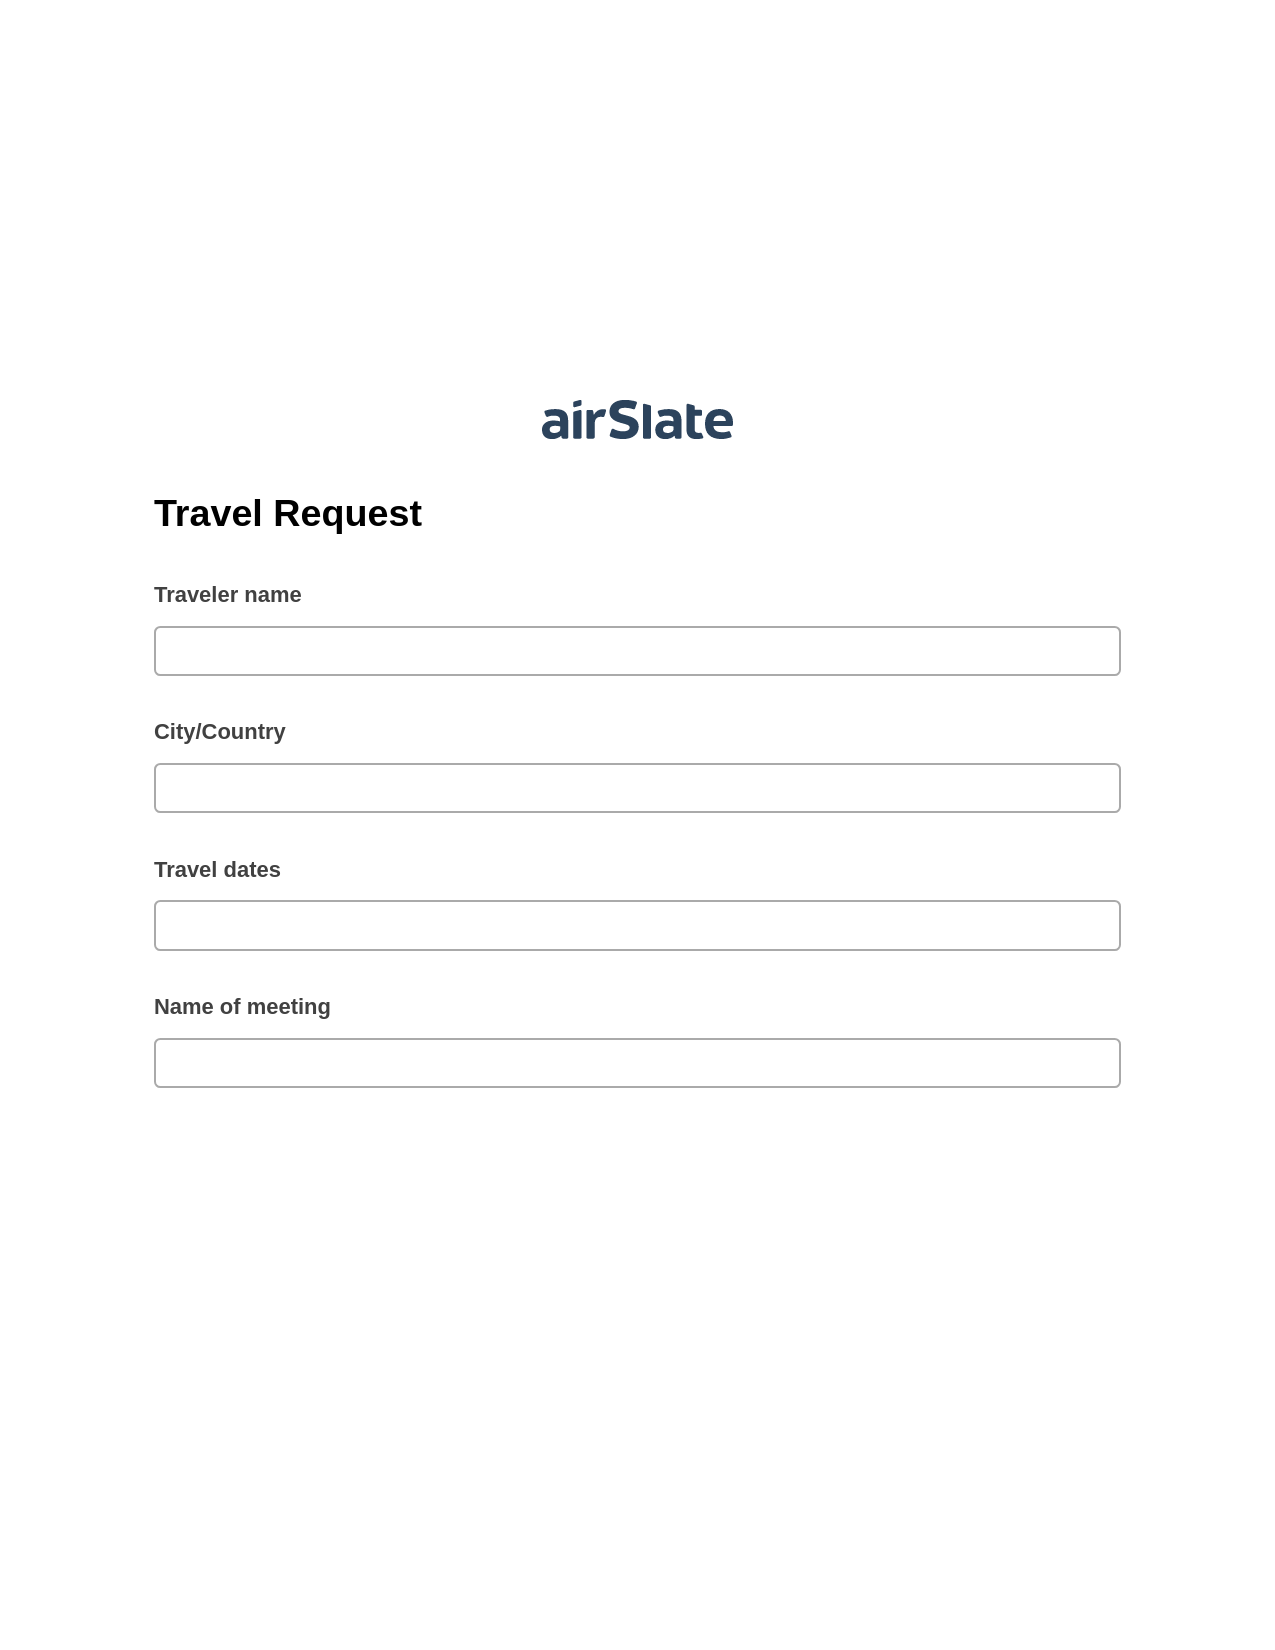 Travel Request Pre-fill from another Slate Bot, Pre-fill with Custom Data Bot, Google Drive Bot